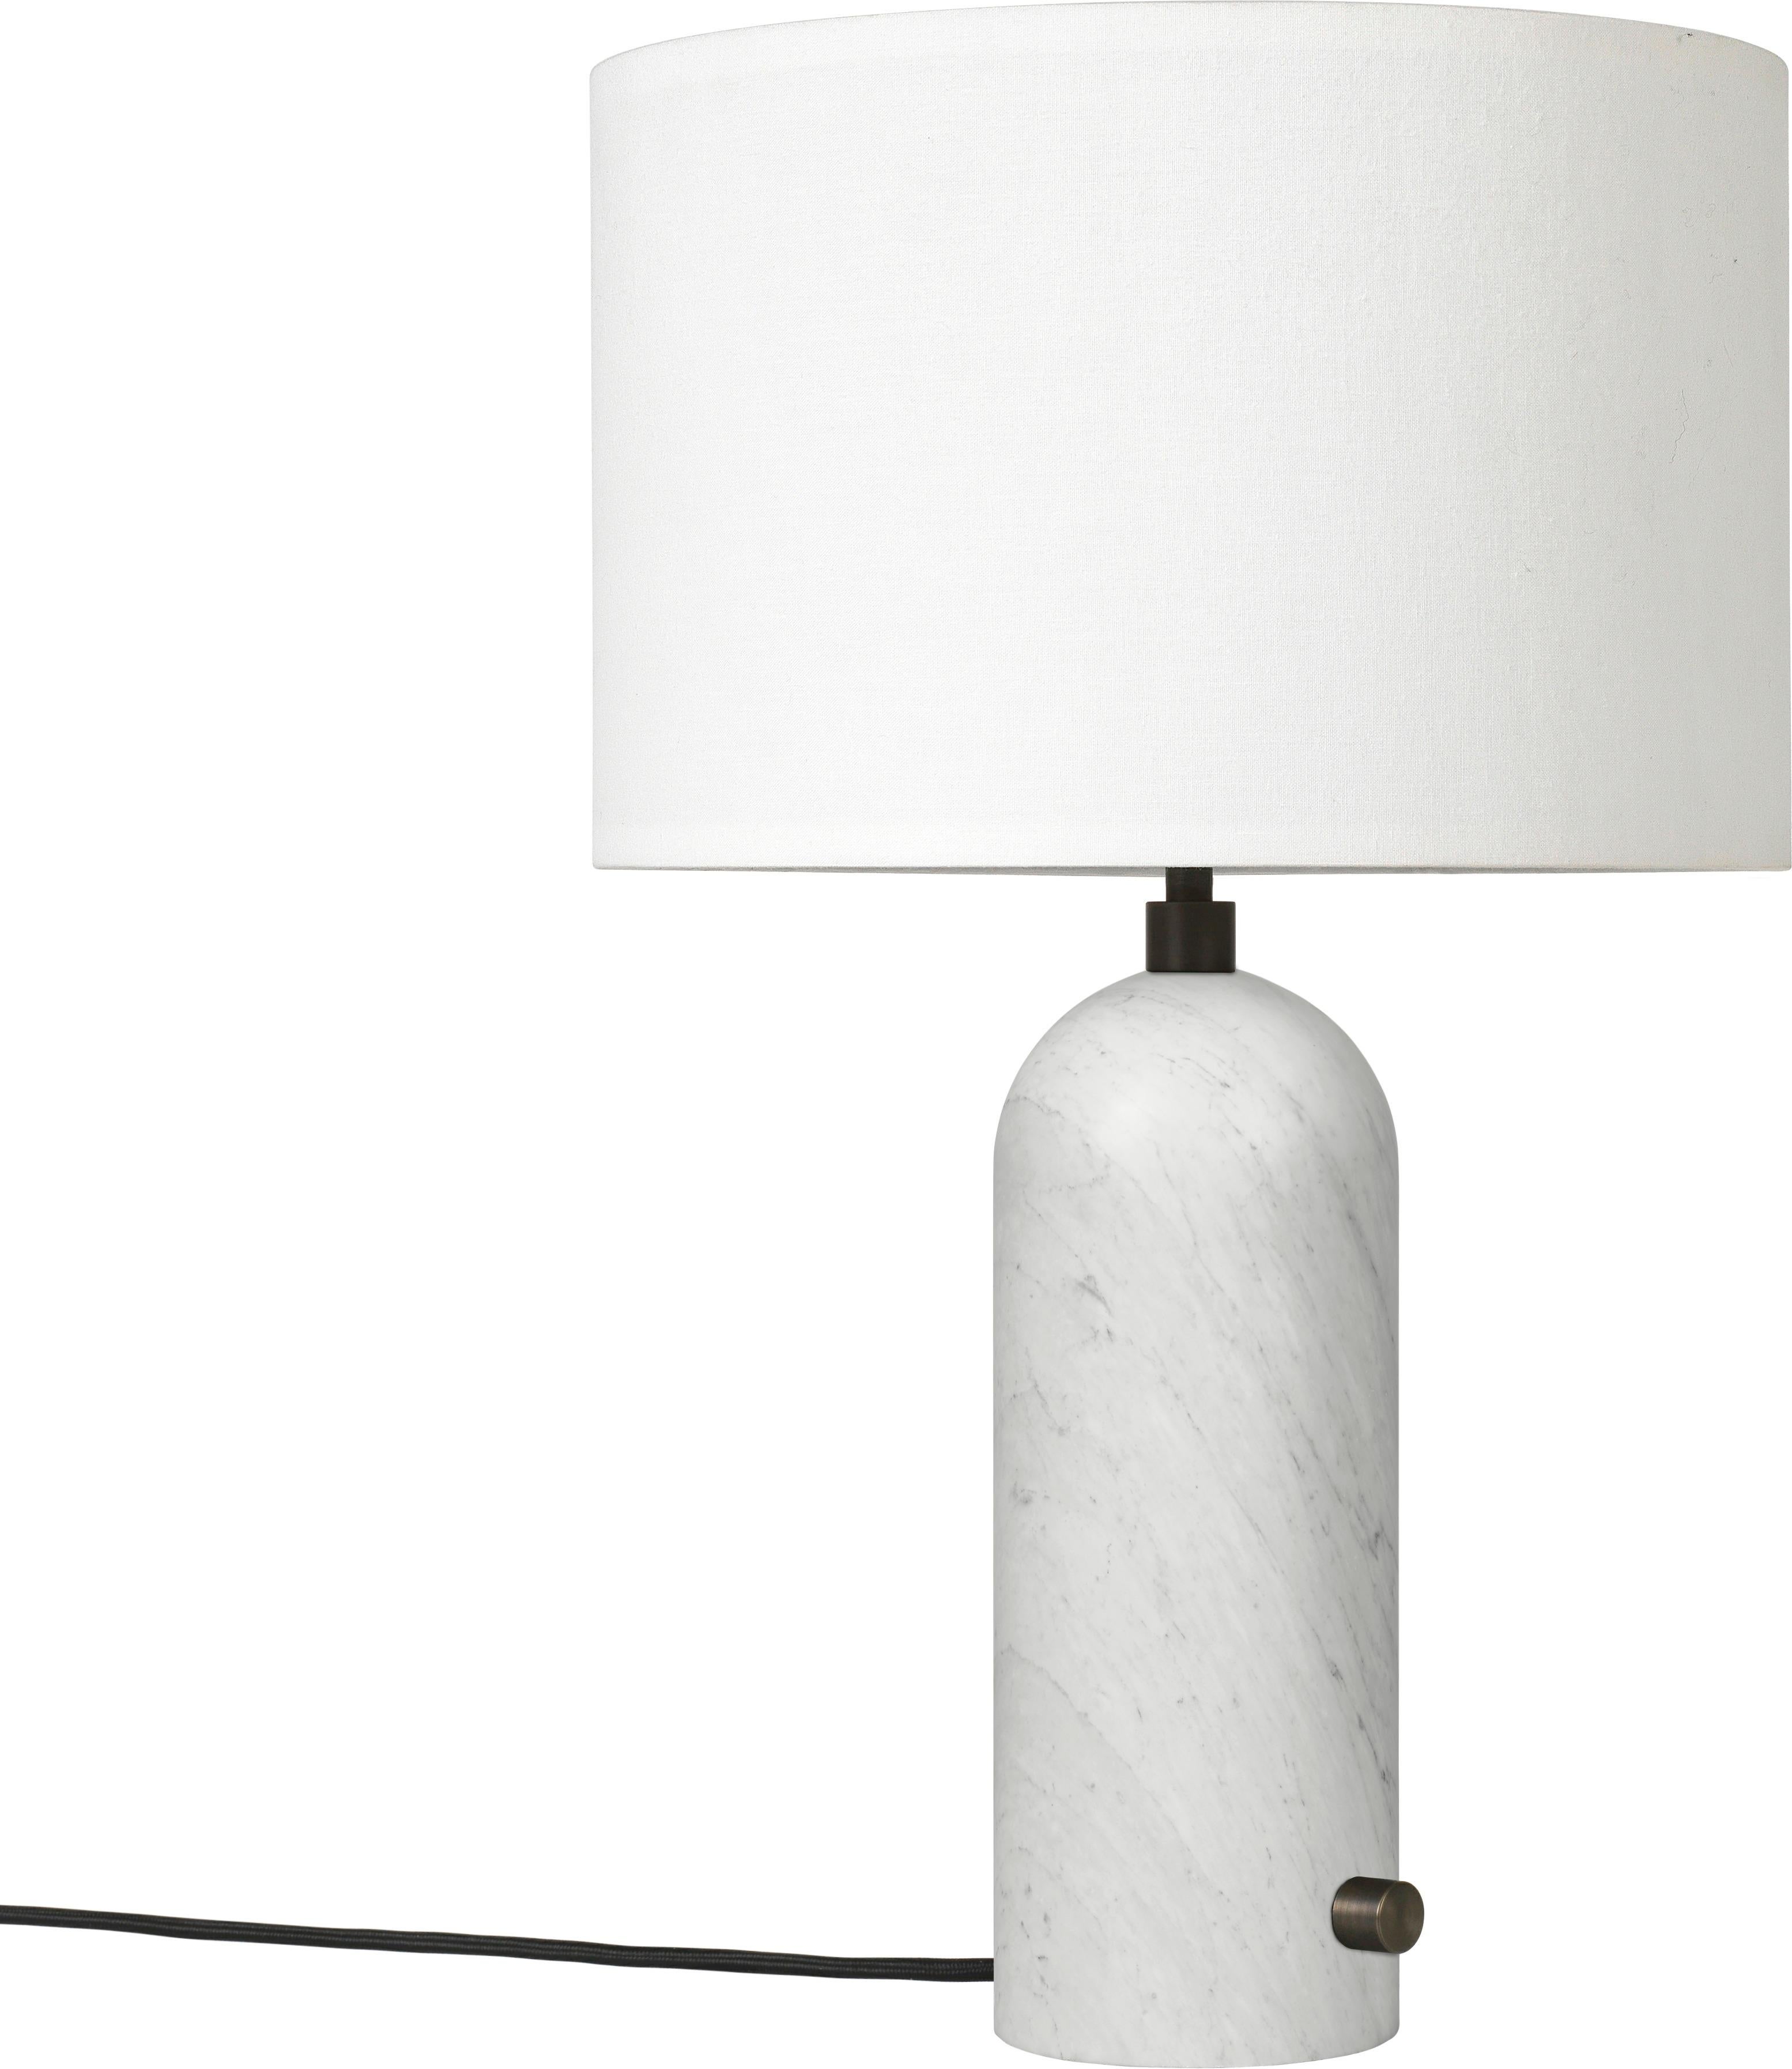 Small 'Gravity' Blackened Steel Table Lamp by Space Copenhagen for Gubi For Sale 7